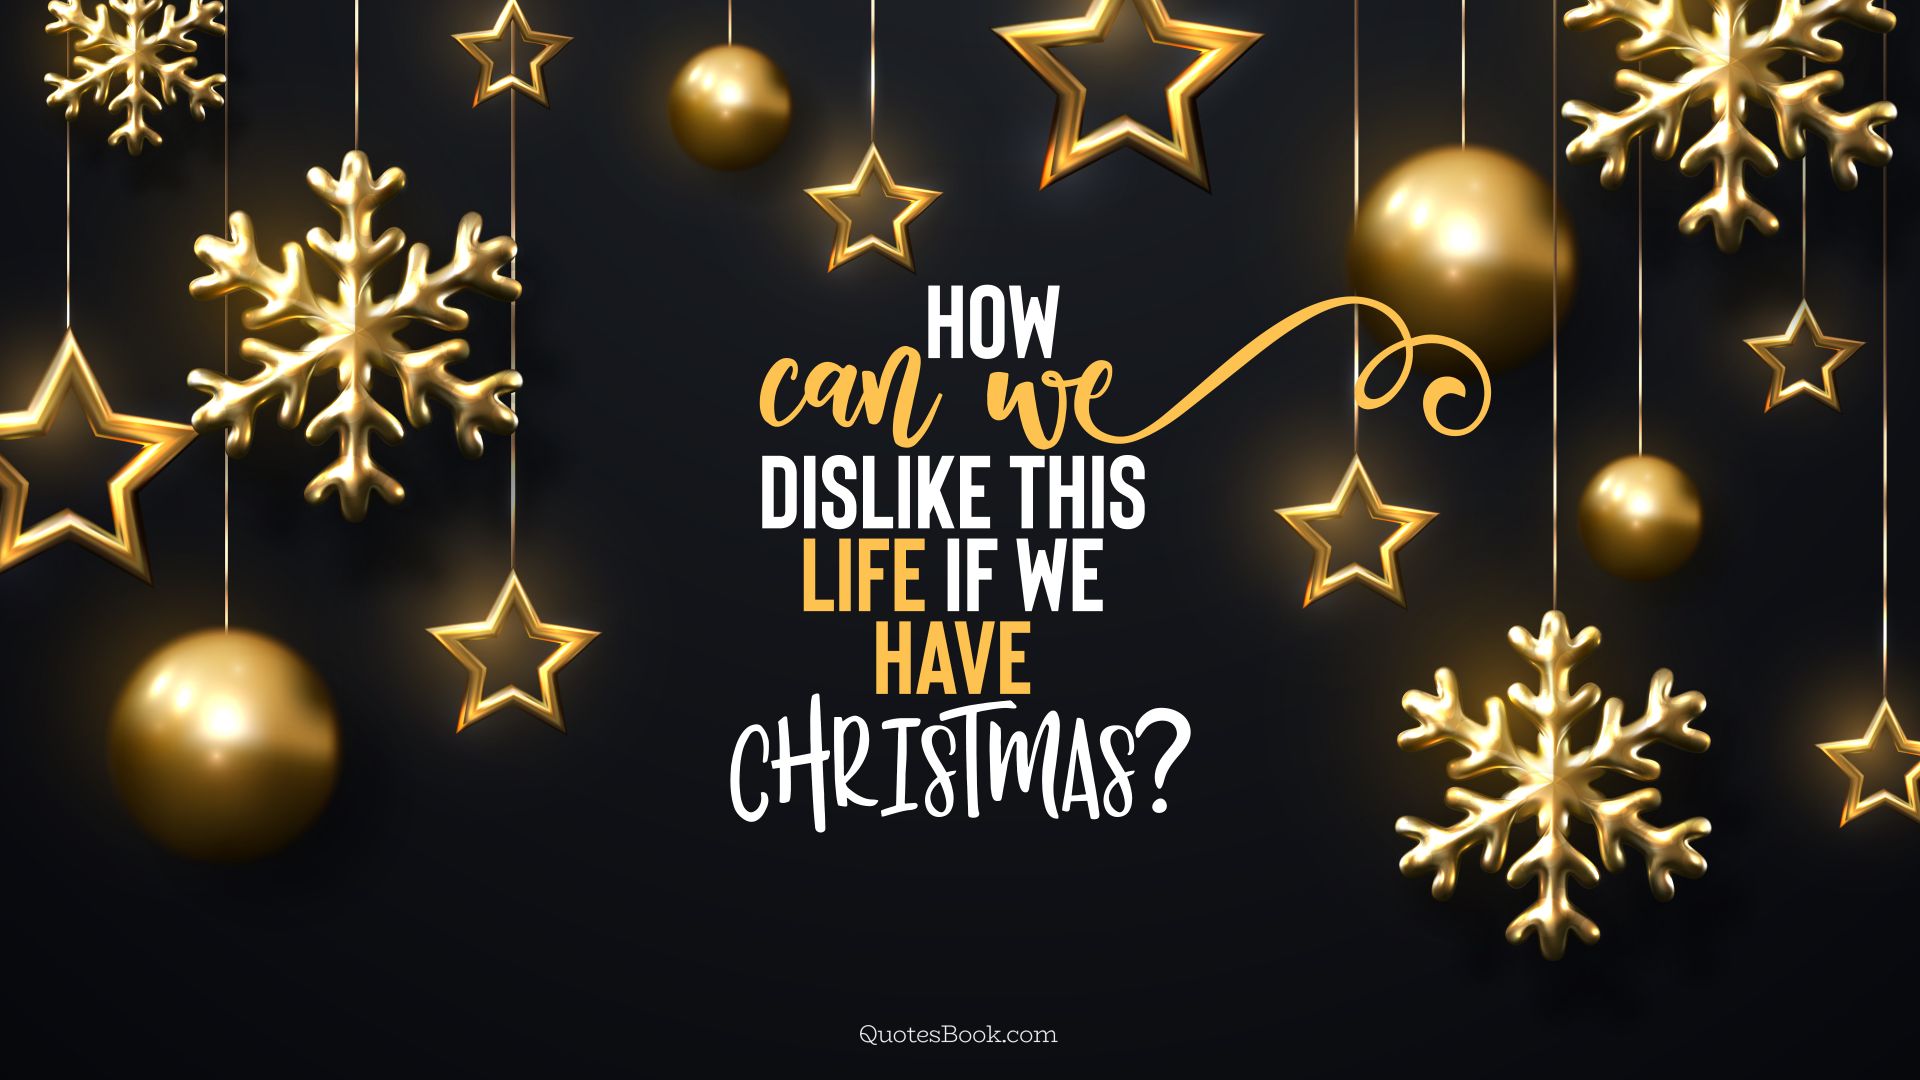 How can we dislike this life if we have Christmas?. - Quote by QuotesBook